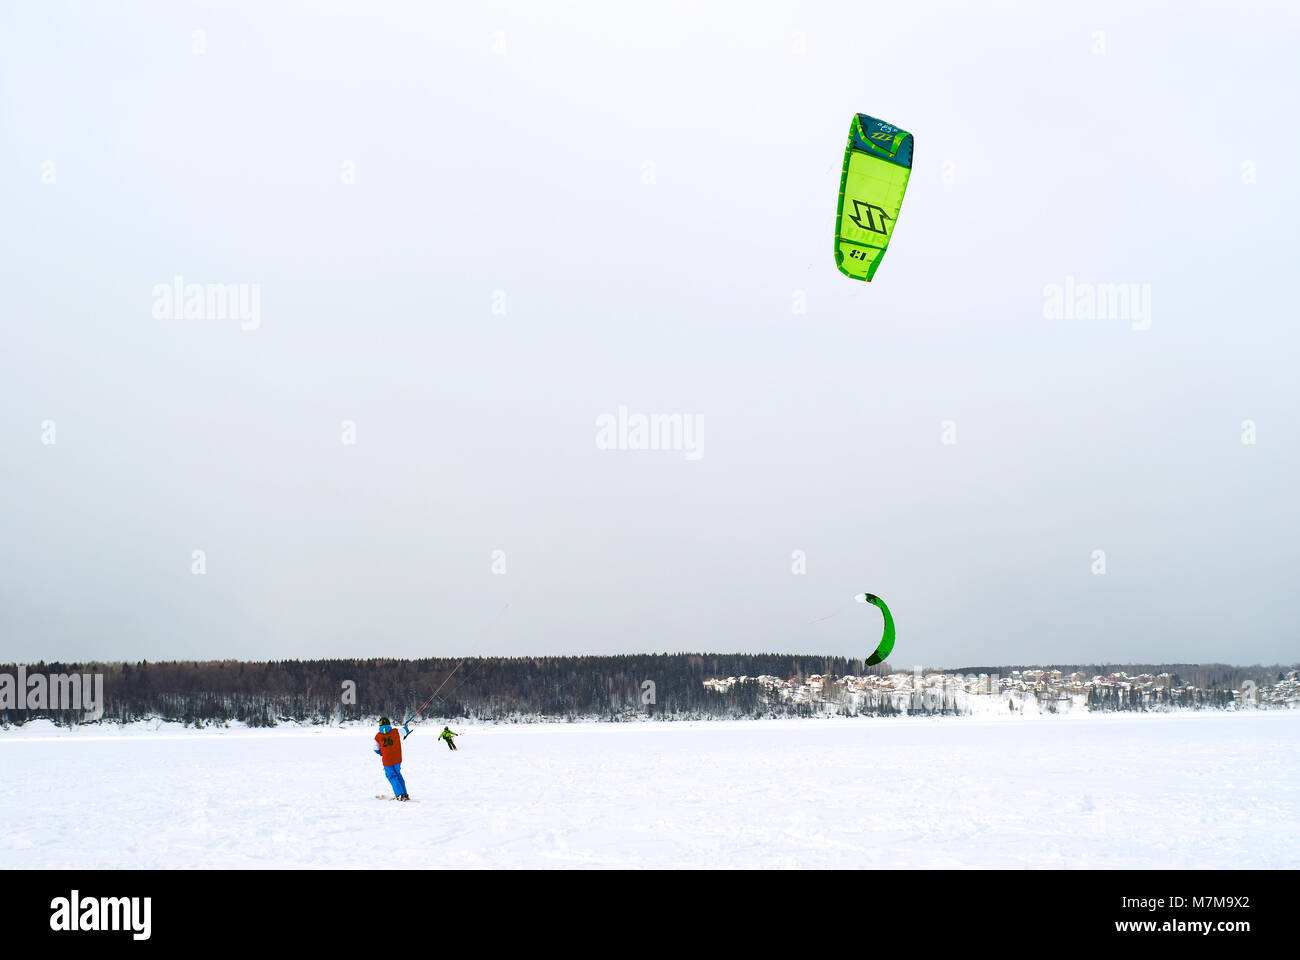 PERM, RUSSIA - MARCH 09, 2018: snow kiters rides on the ice of a frozen river Stock Photo